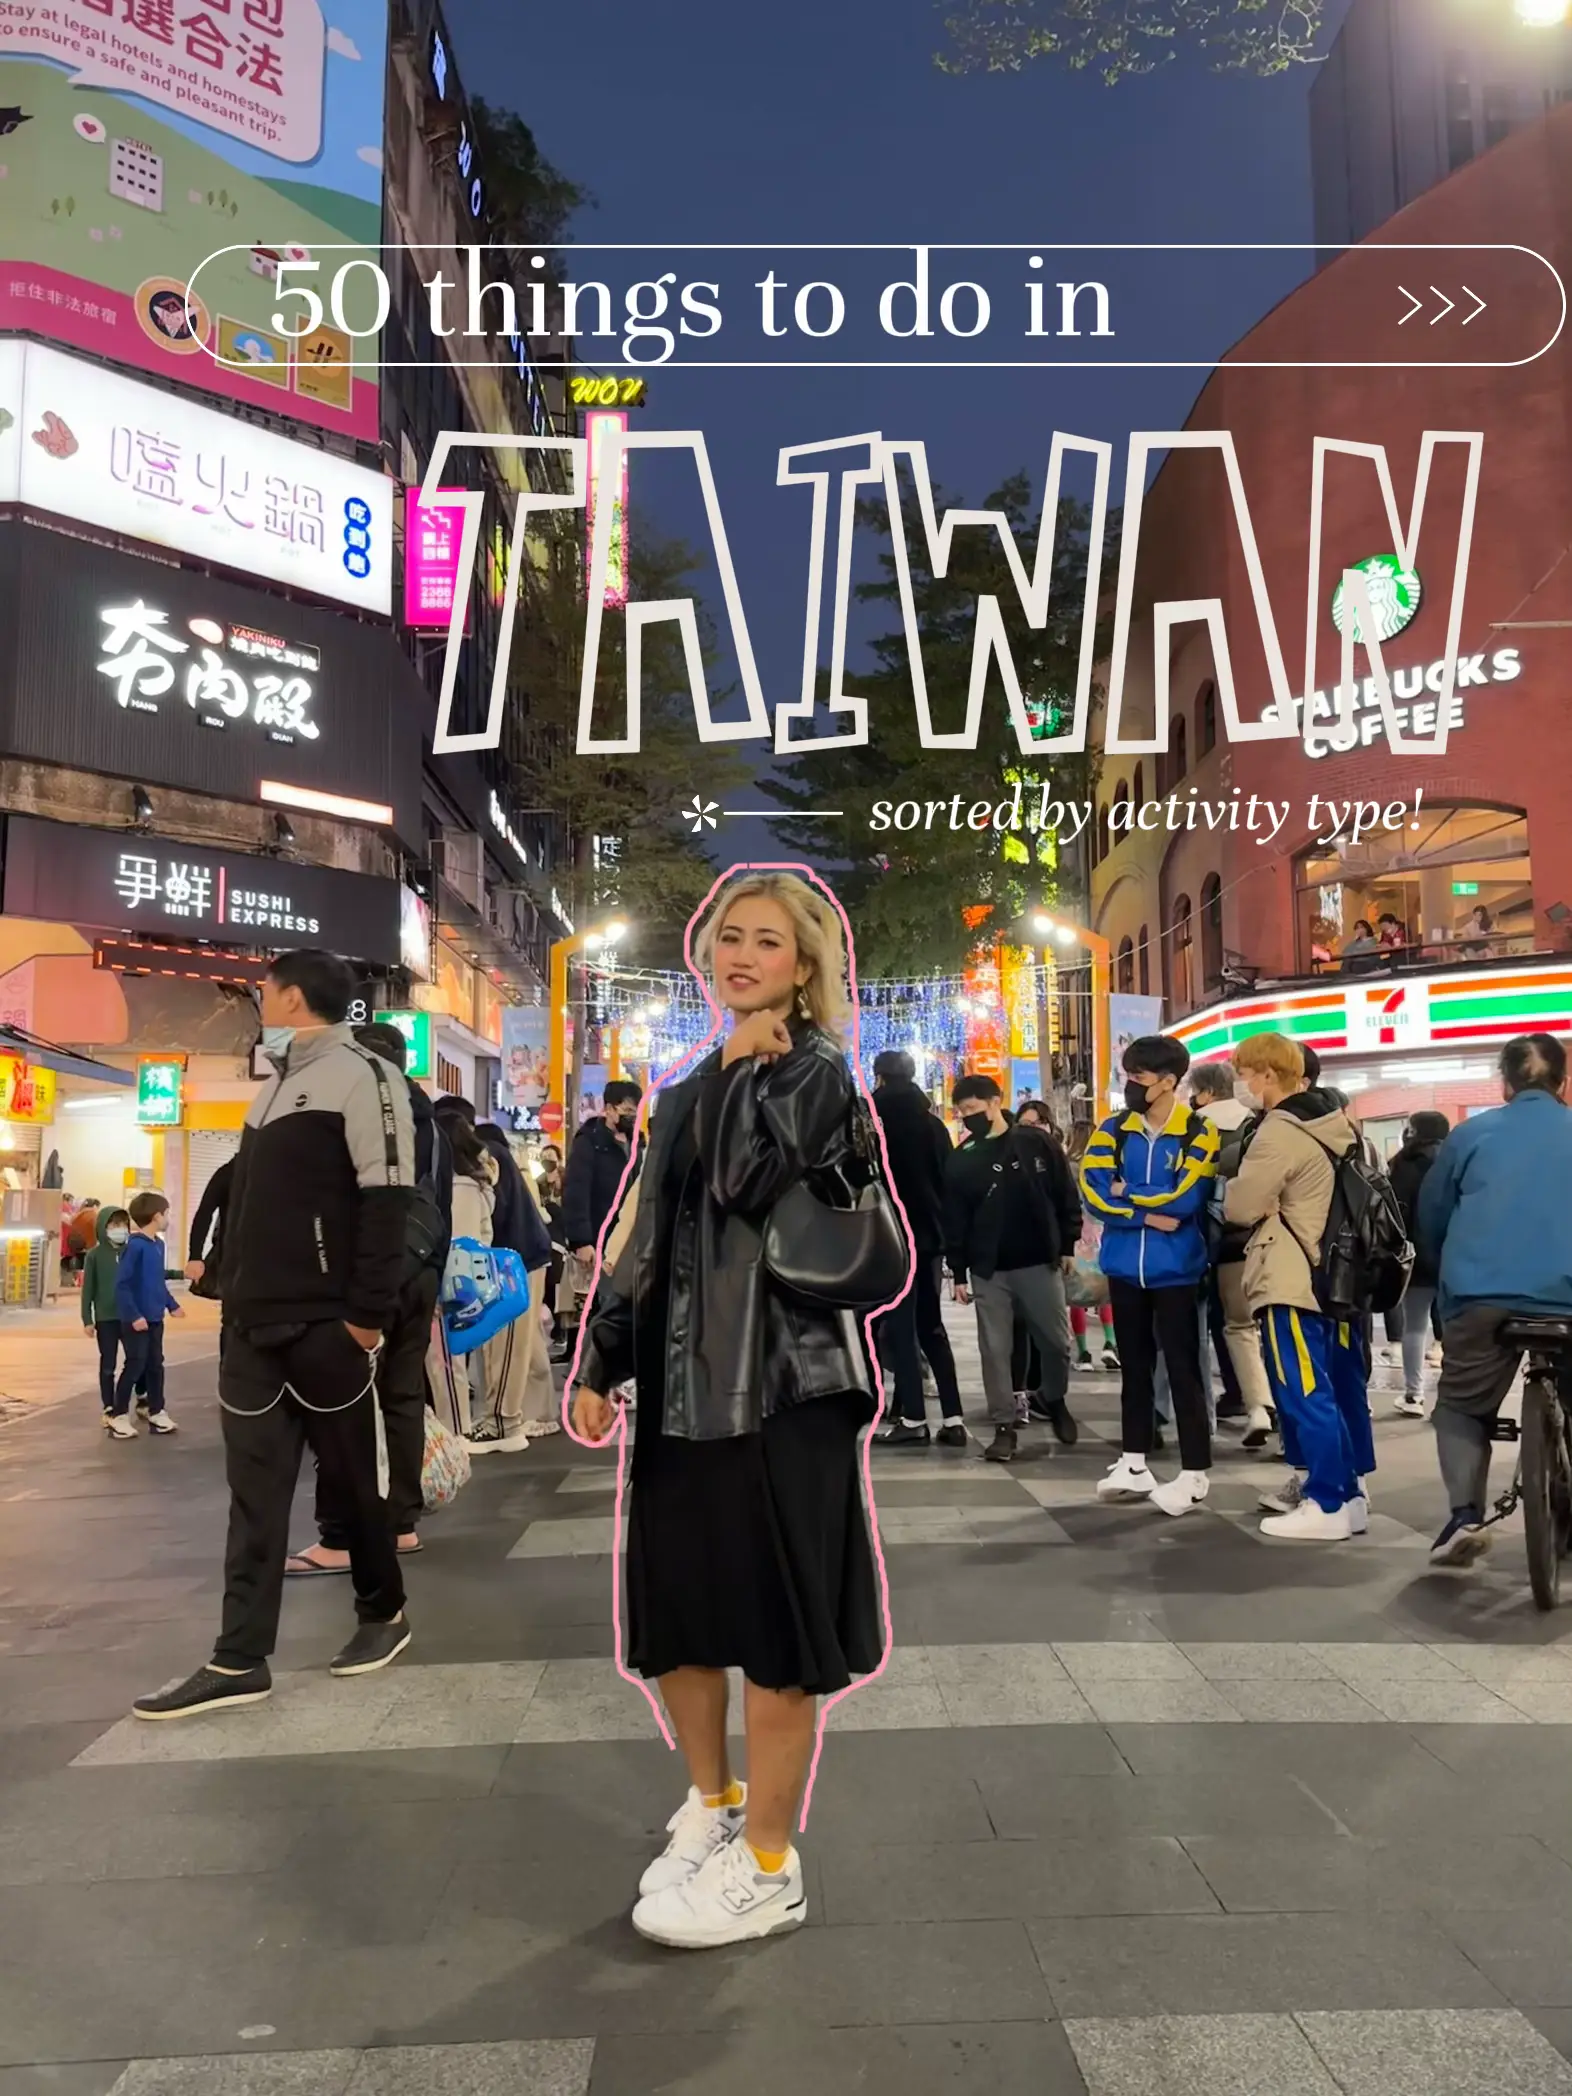 heading to TAIWAN? save this itinerary 👇🏻's images